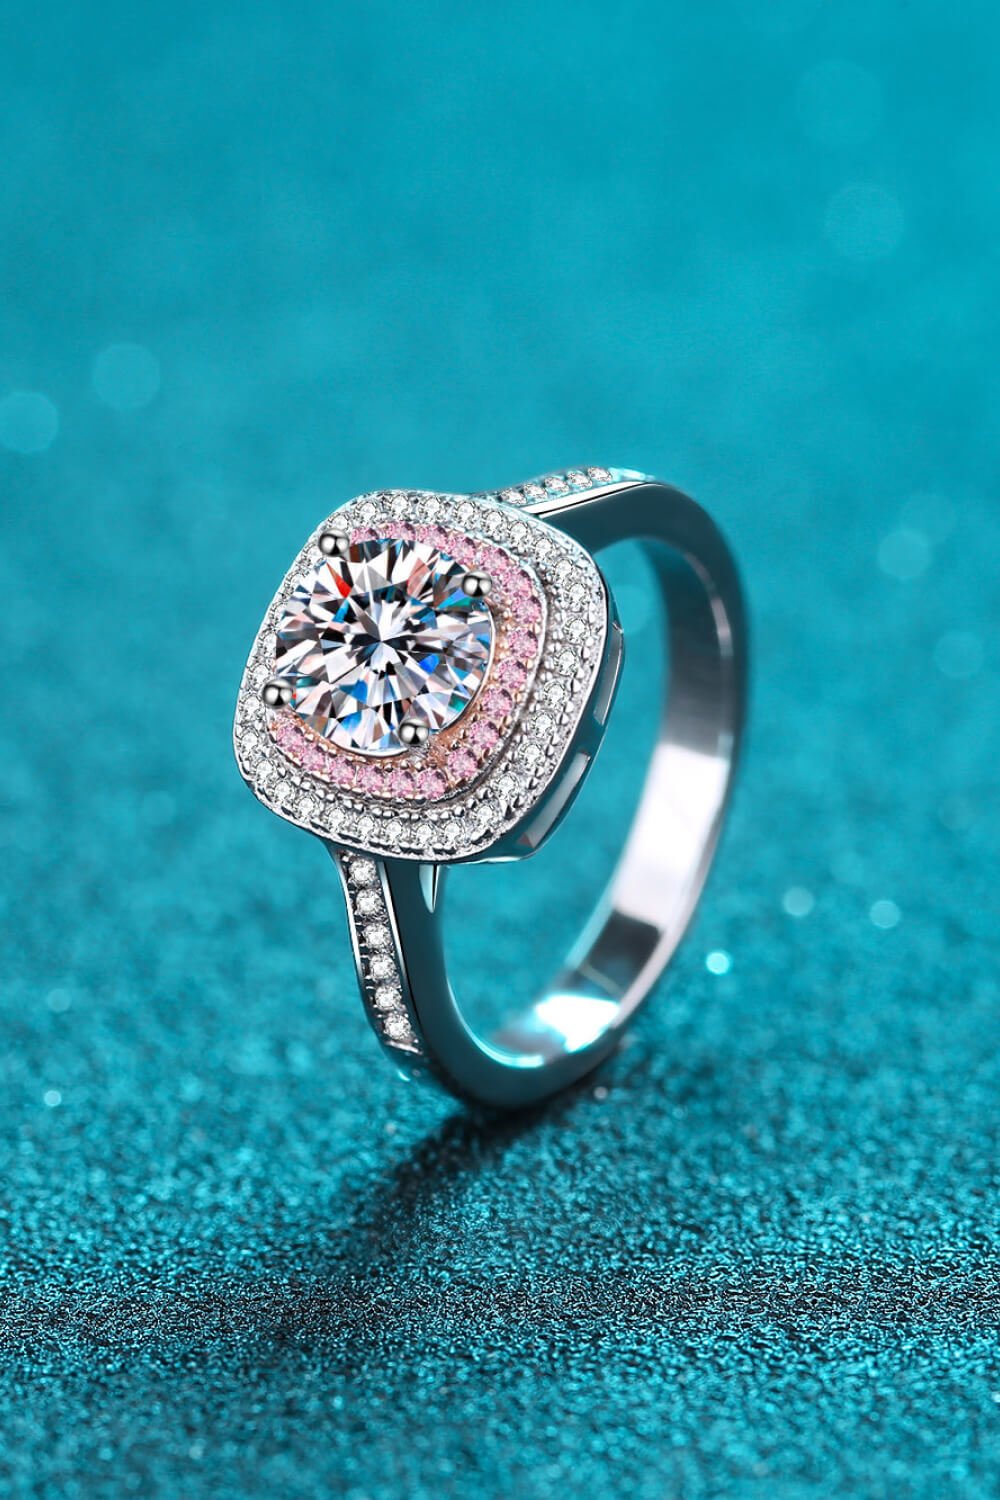 Need You Now Moissanite Ring - BloomBliss.com